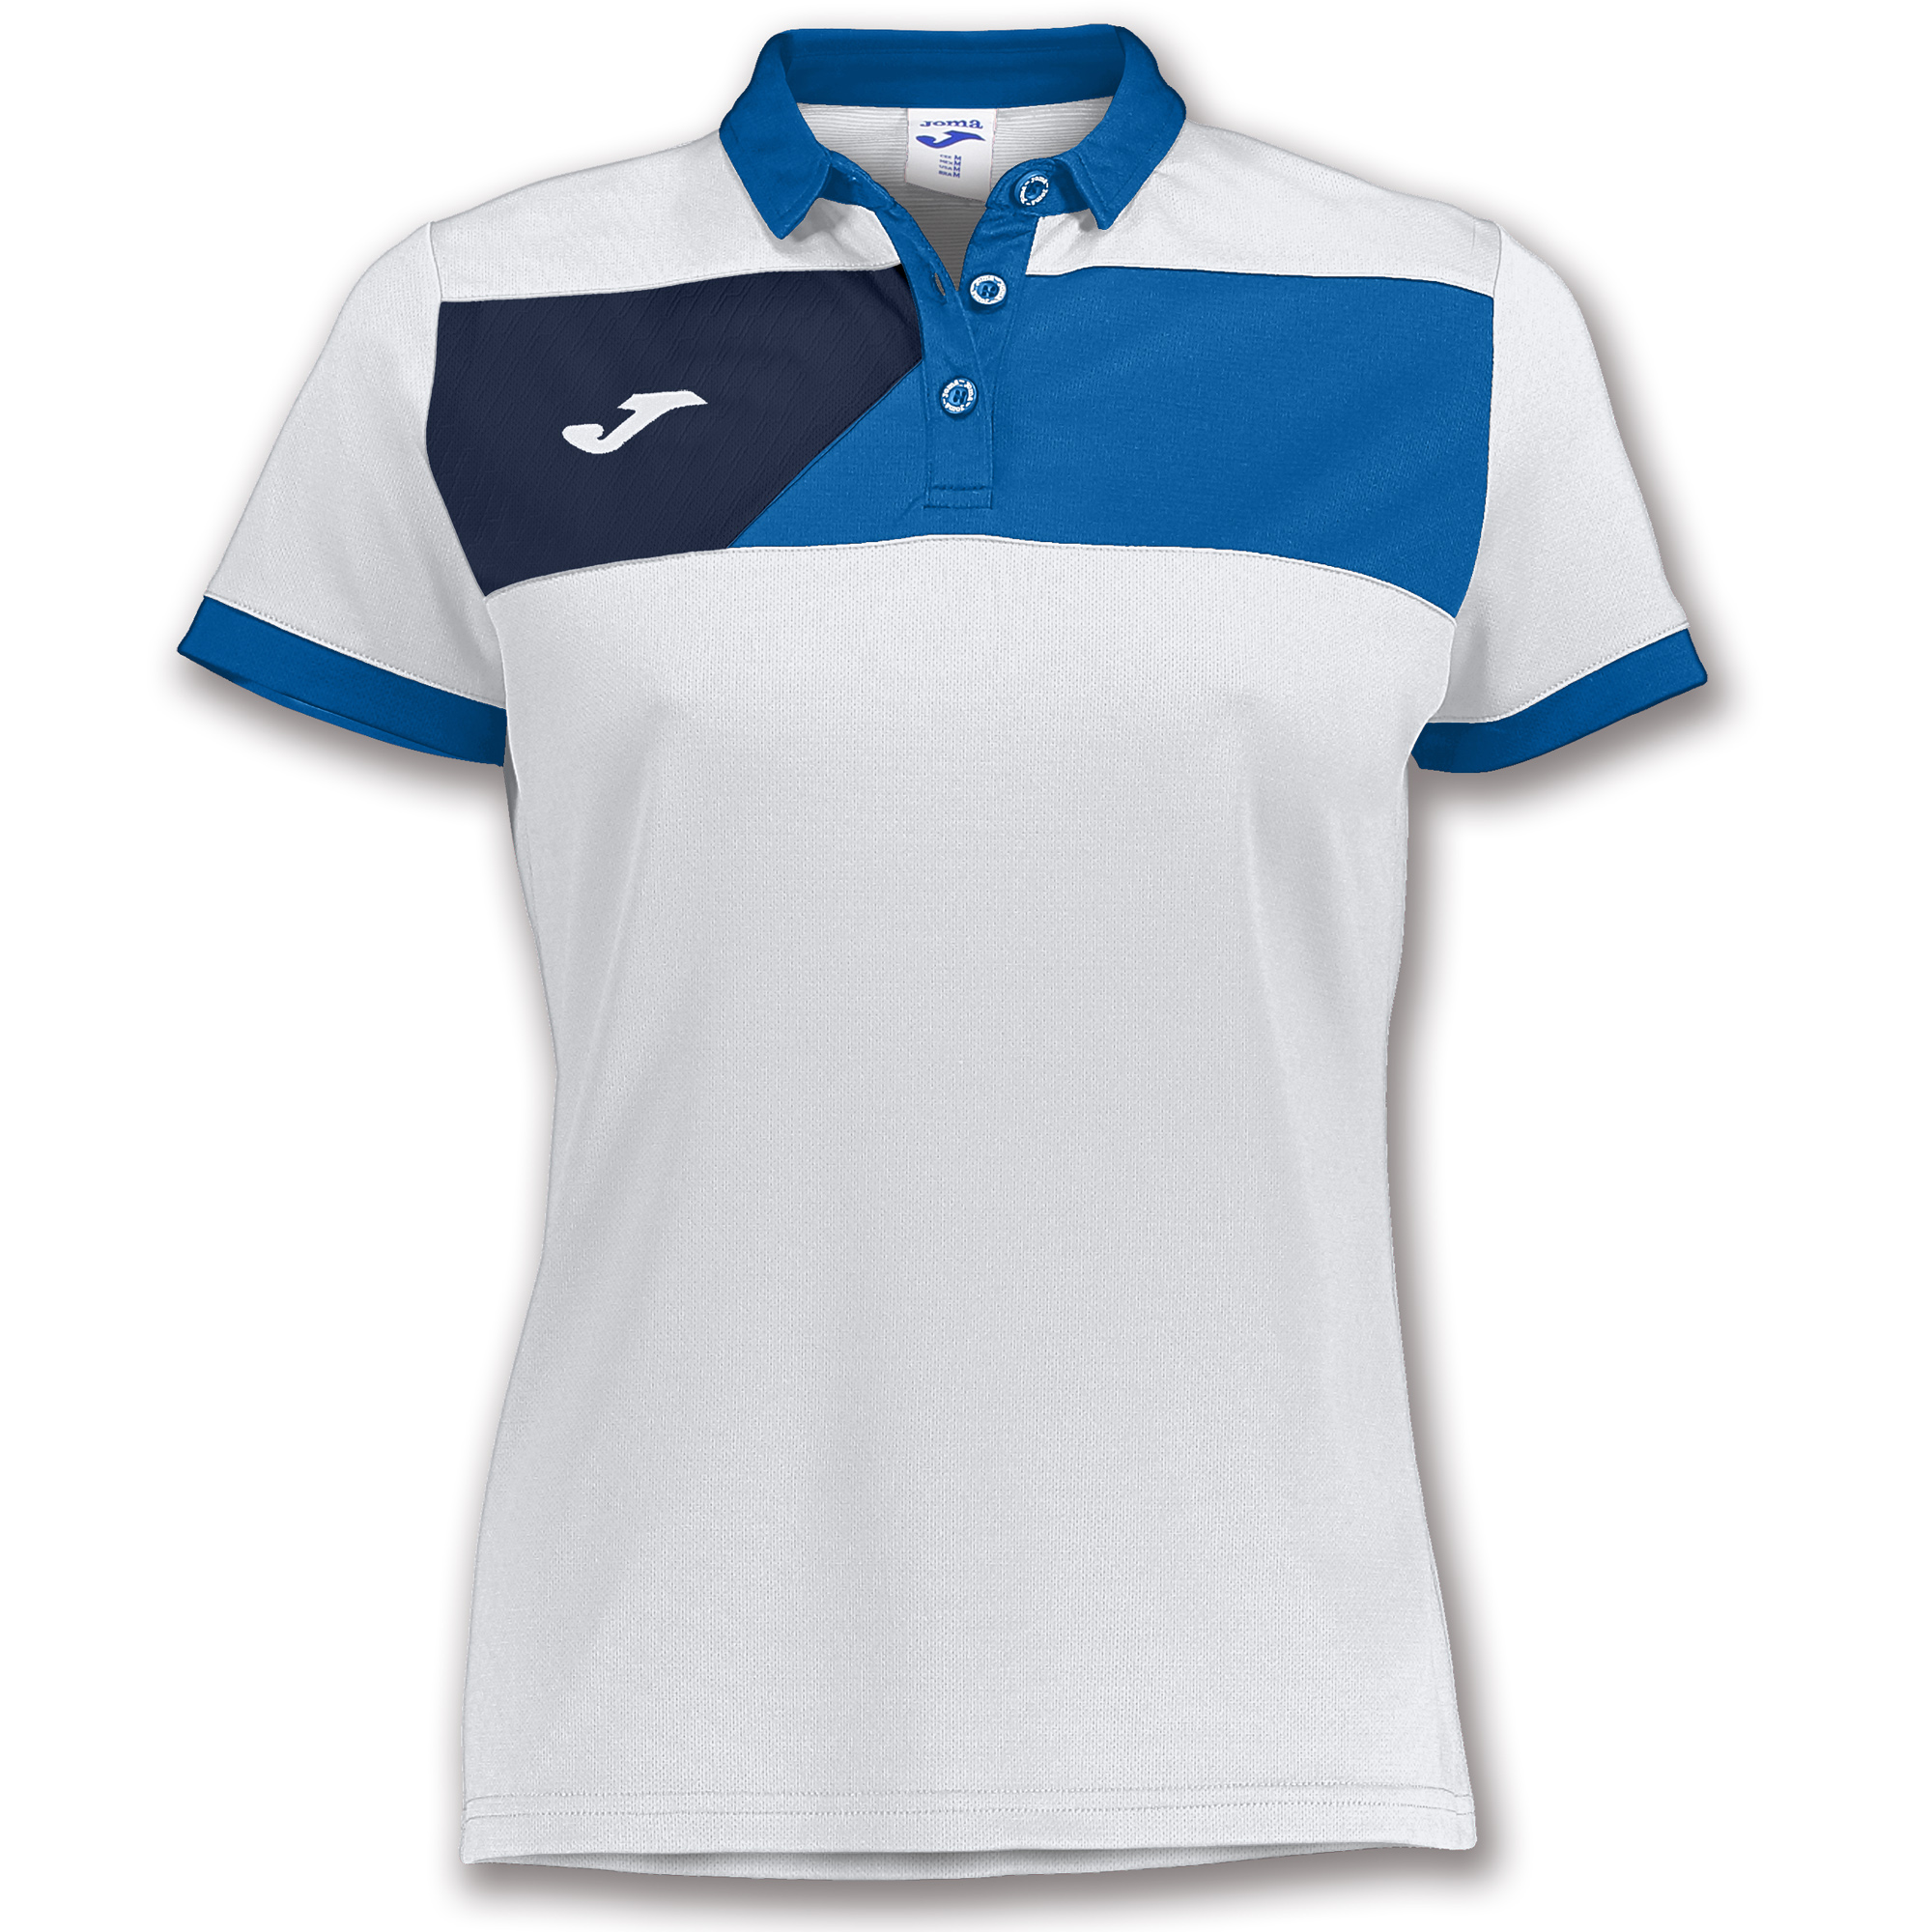 Buy > blue white polo shirt > in stock